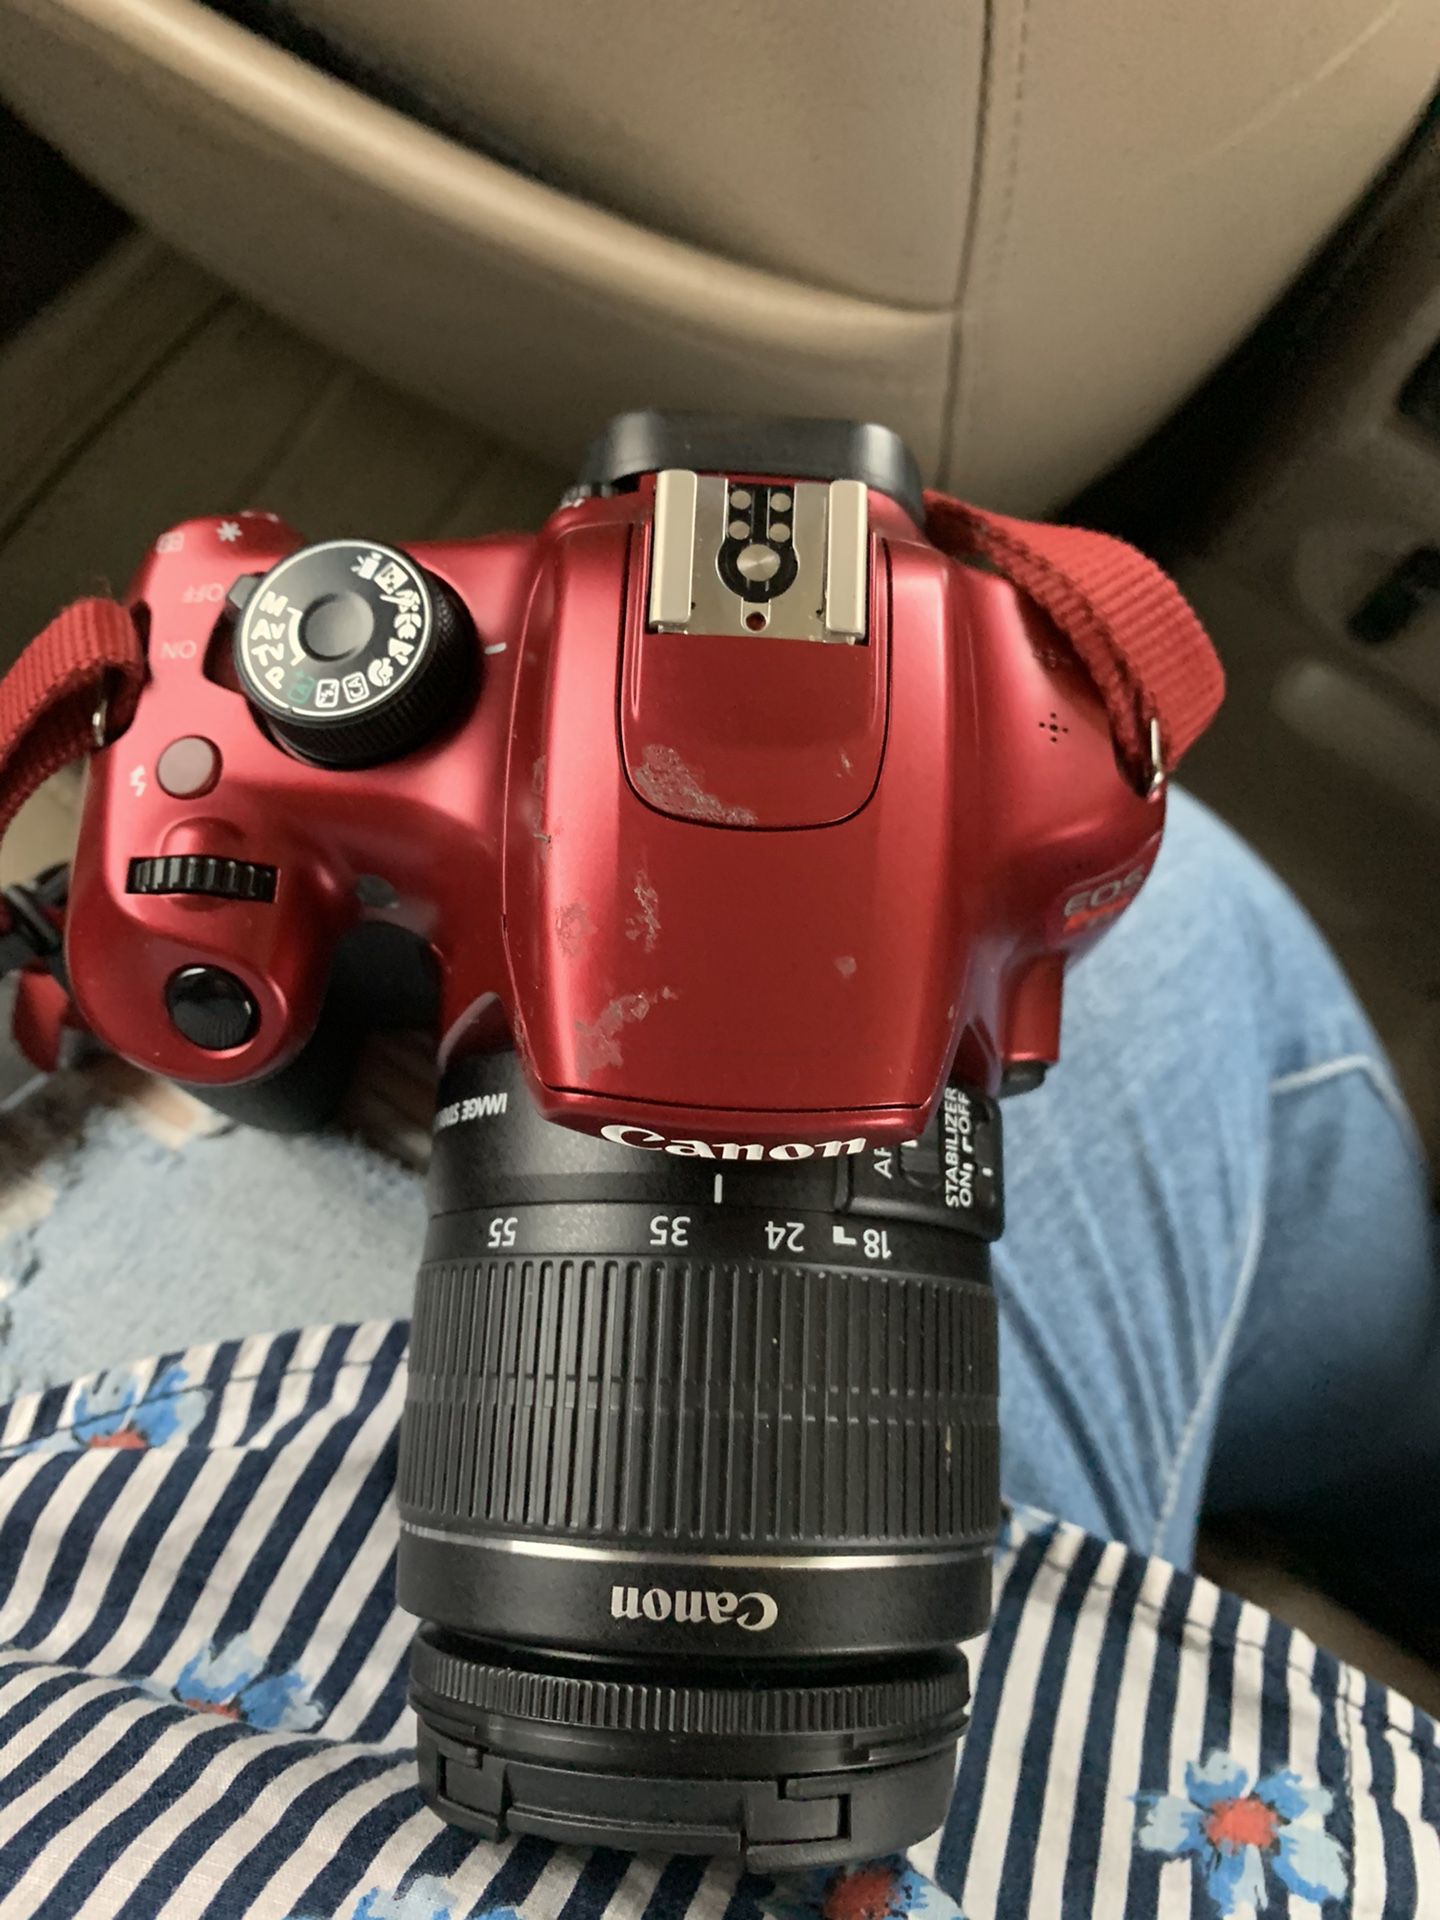 Canon Eos camera with addl lenses